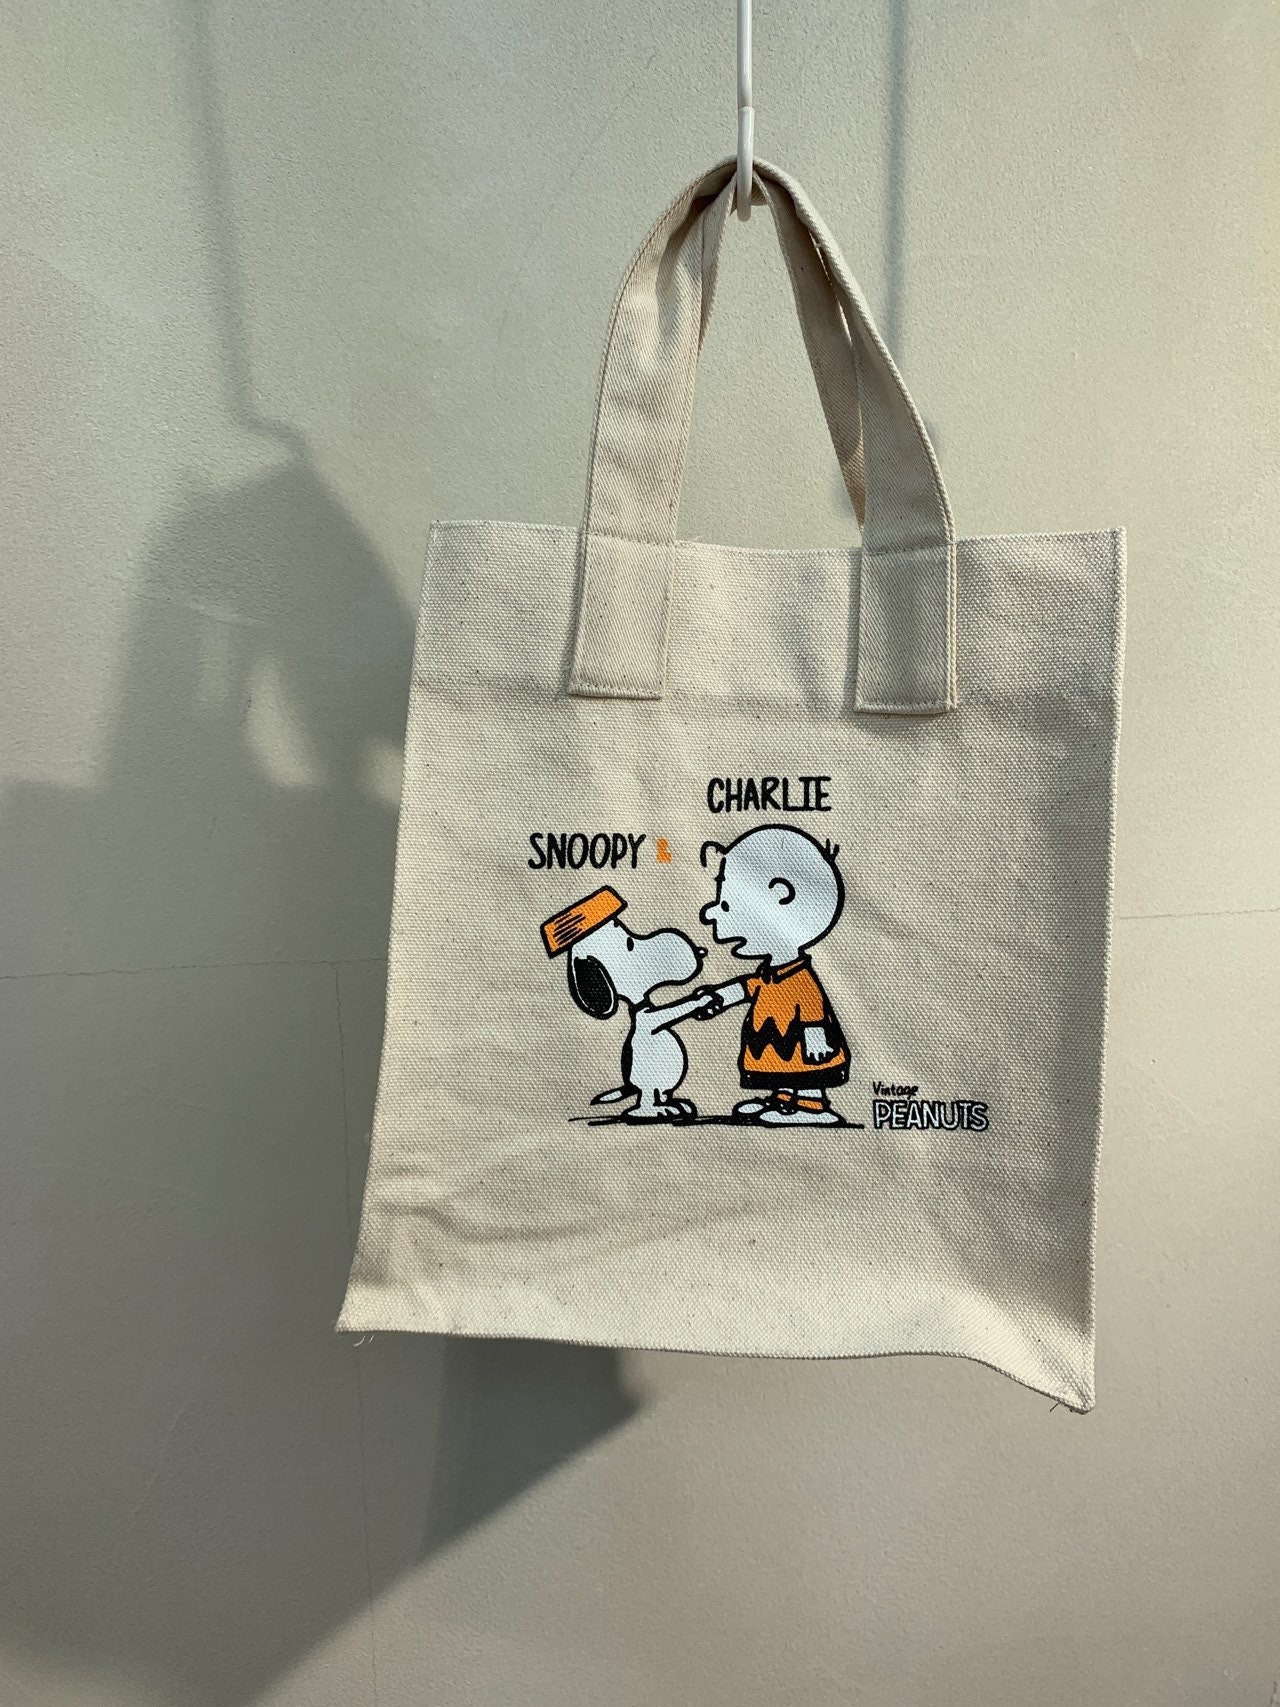 Snoopy and Charlie Canvas Woven Cotton Tote Bag Utility Market - Etsy